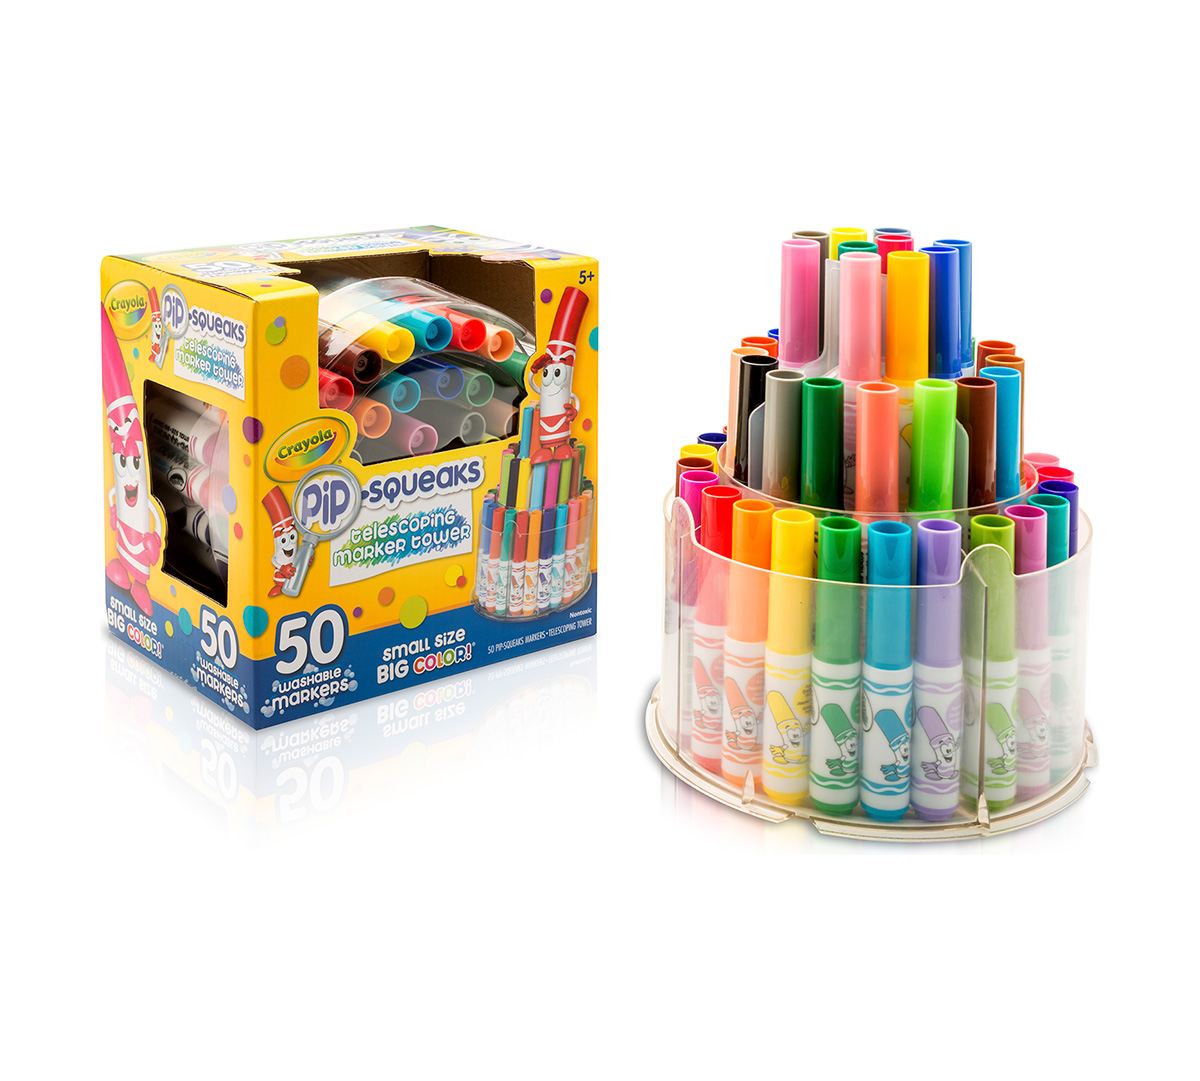 Crayola Washable Pip-Squeaks Skinnies Markers 16-Count per Pack (1-Pack)